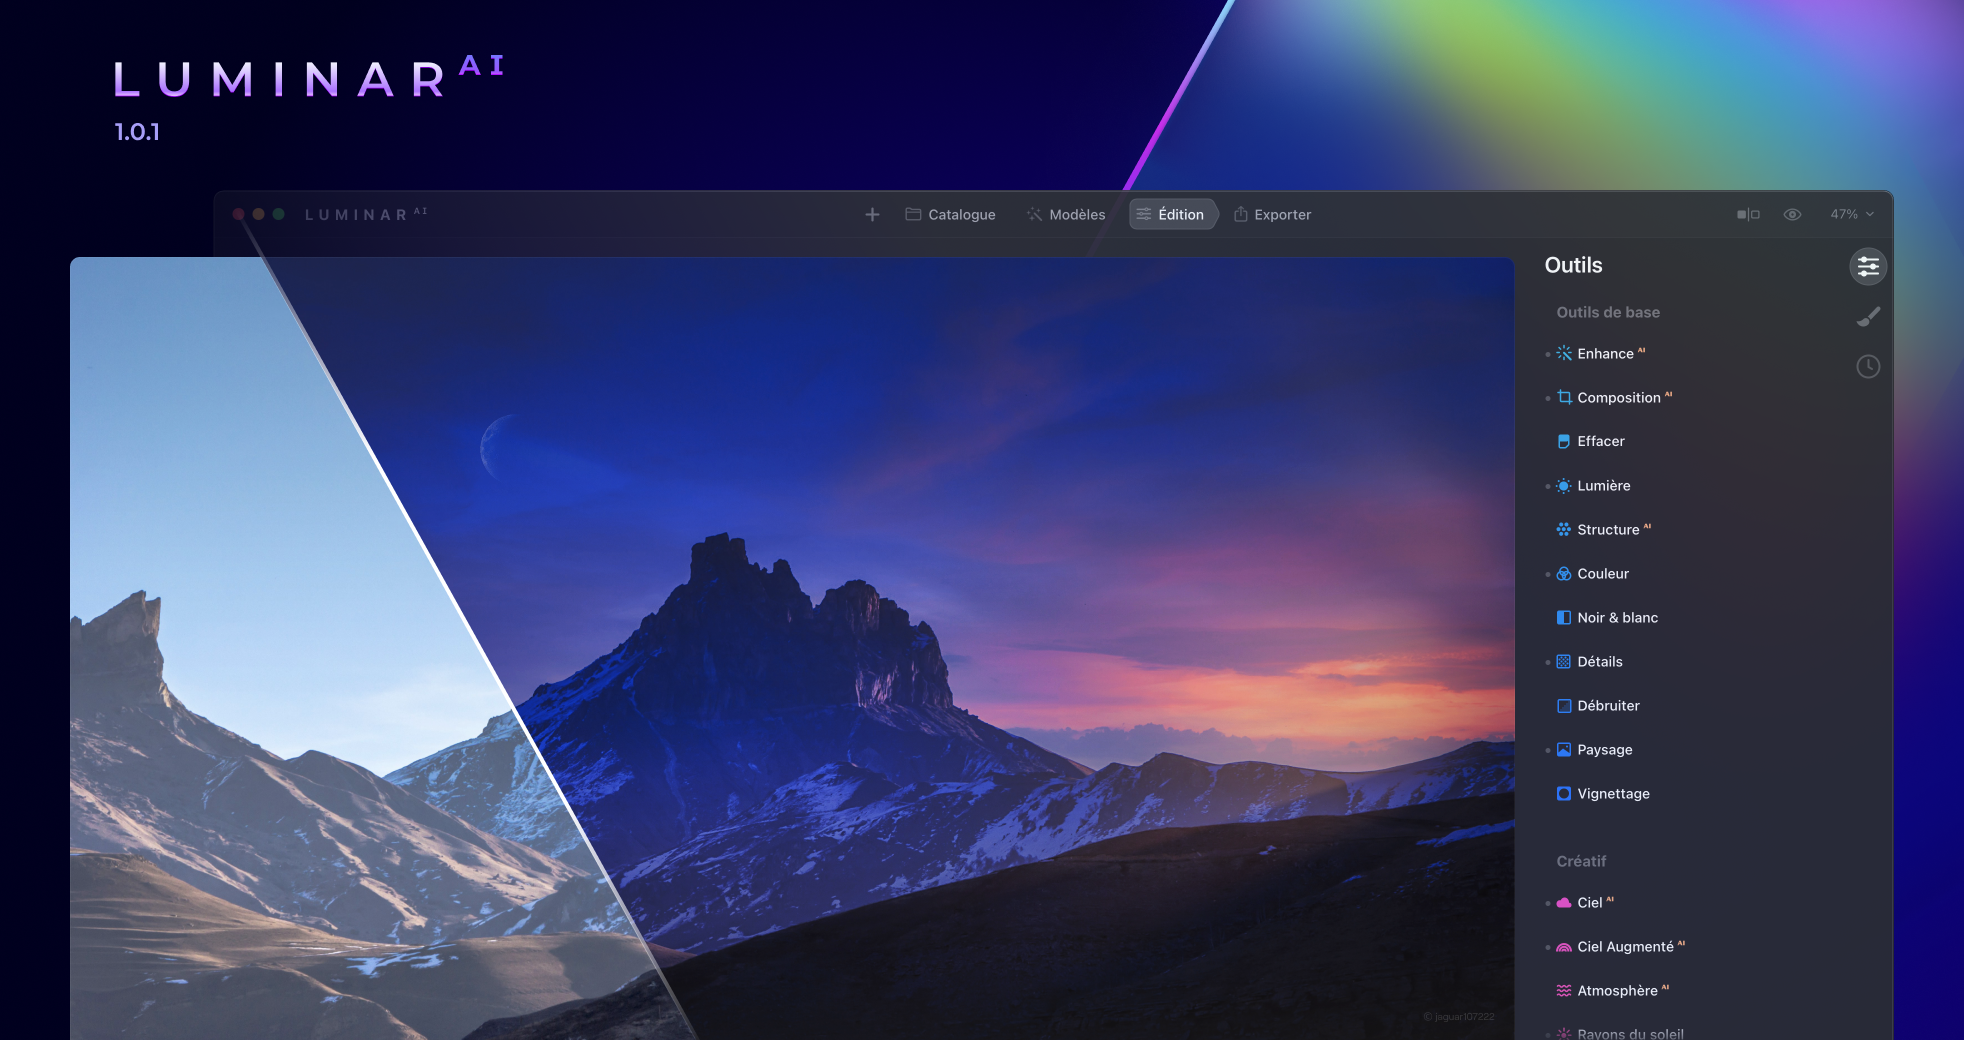 Luminar Neo 1.12.0.11756 download the new version for windows